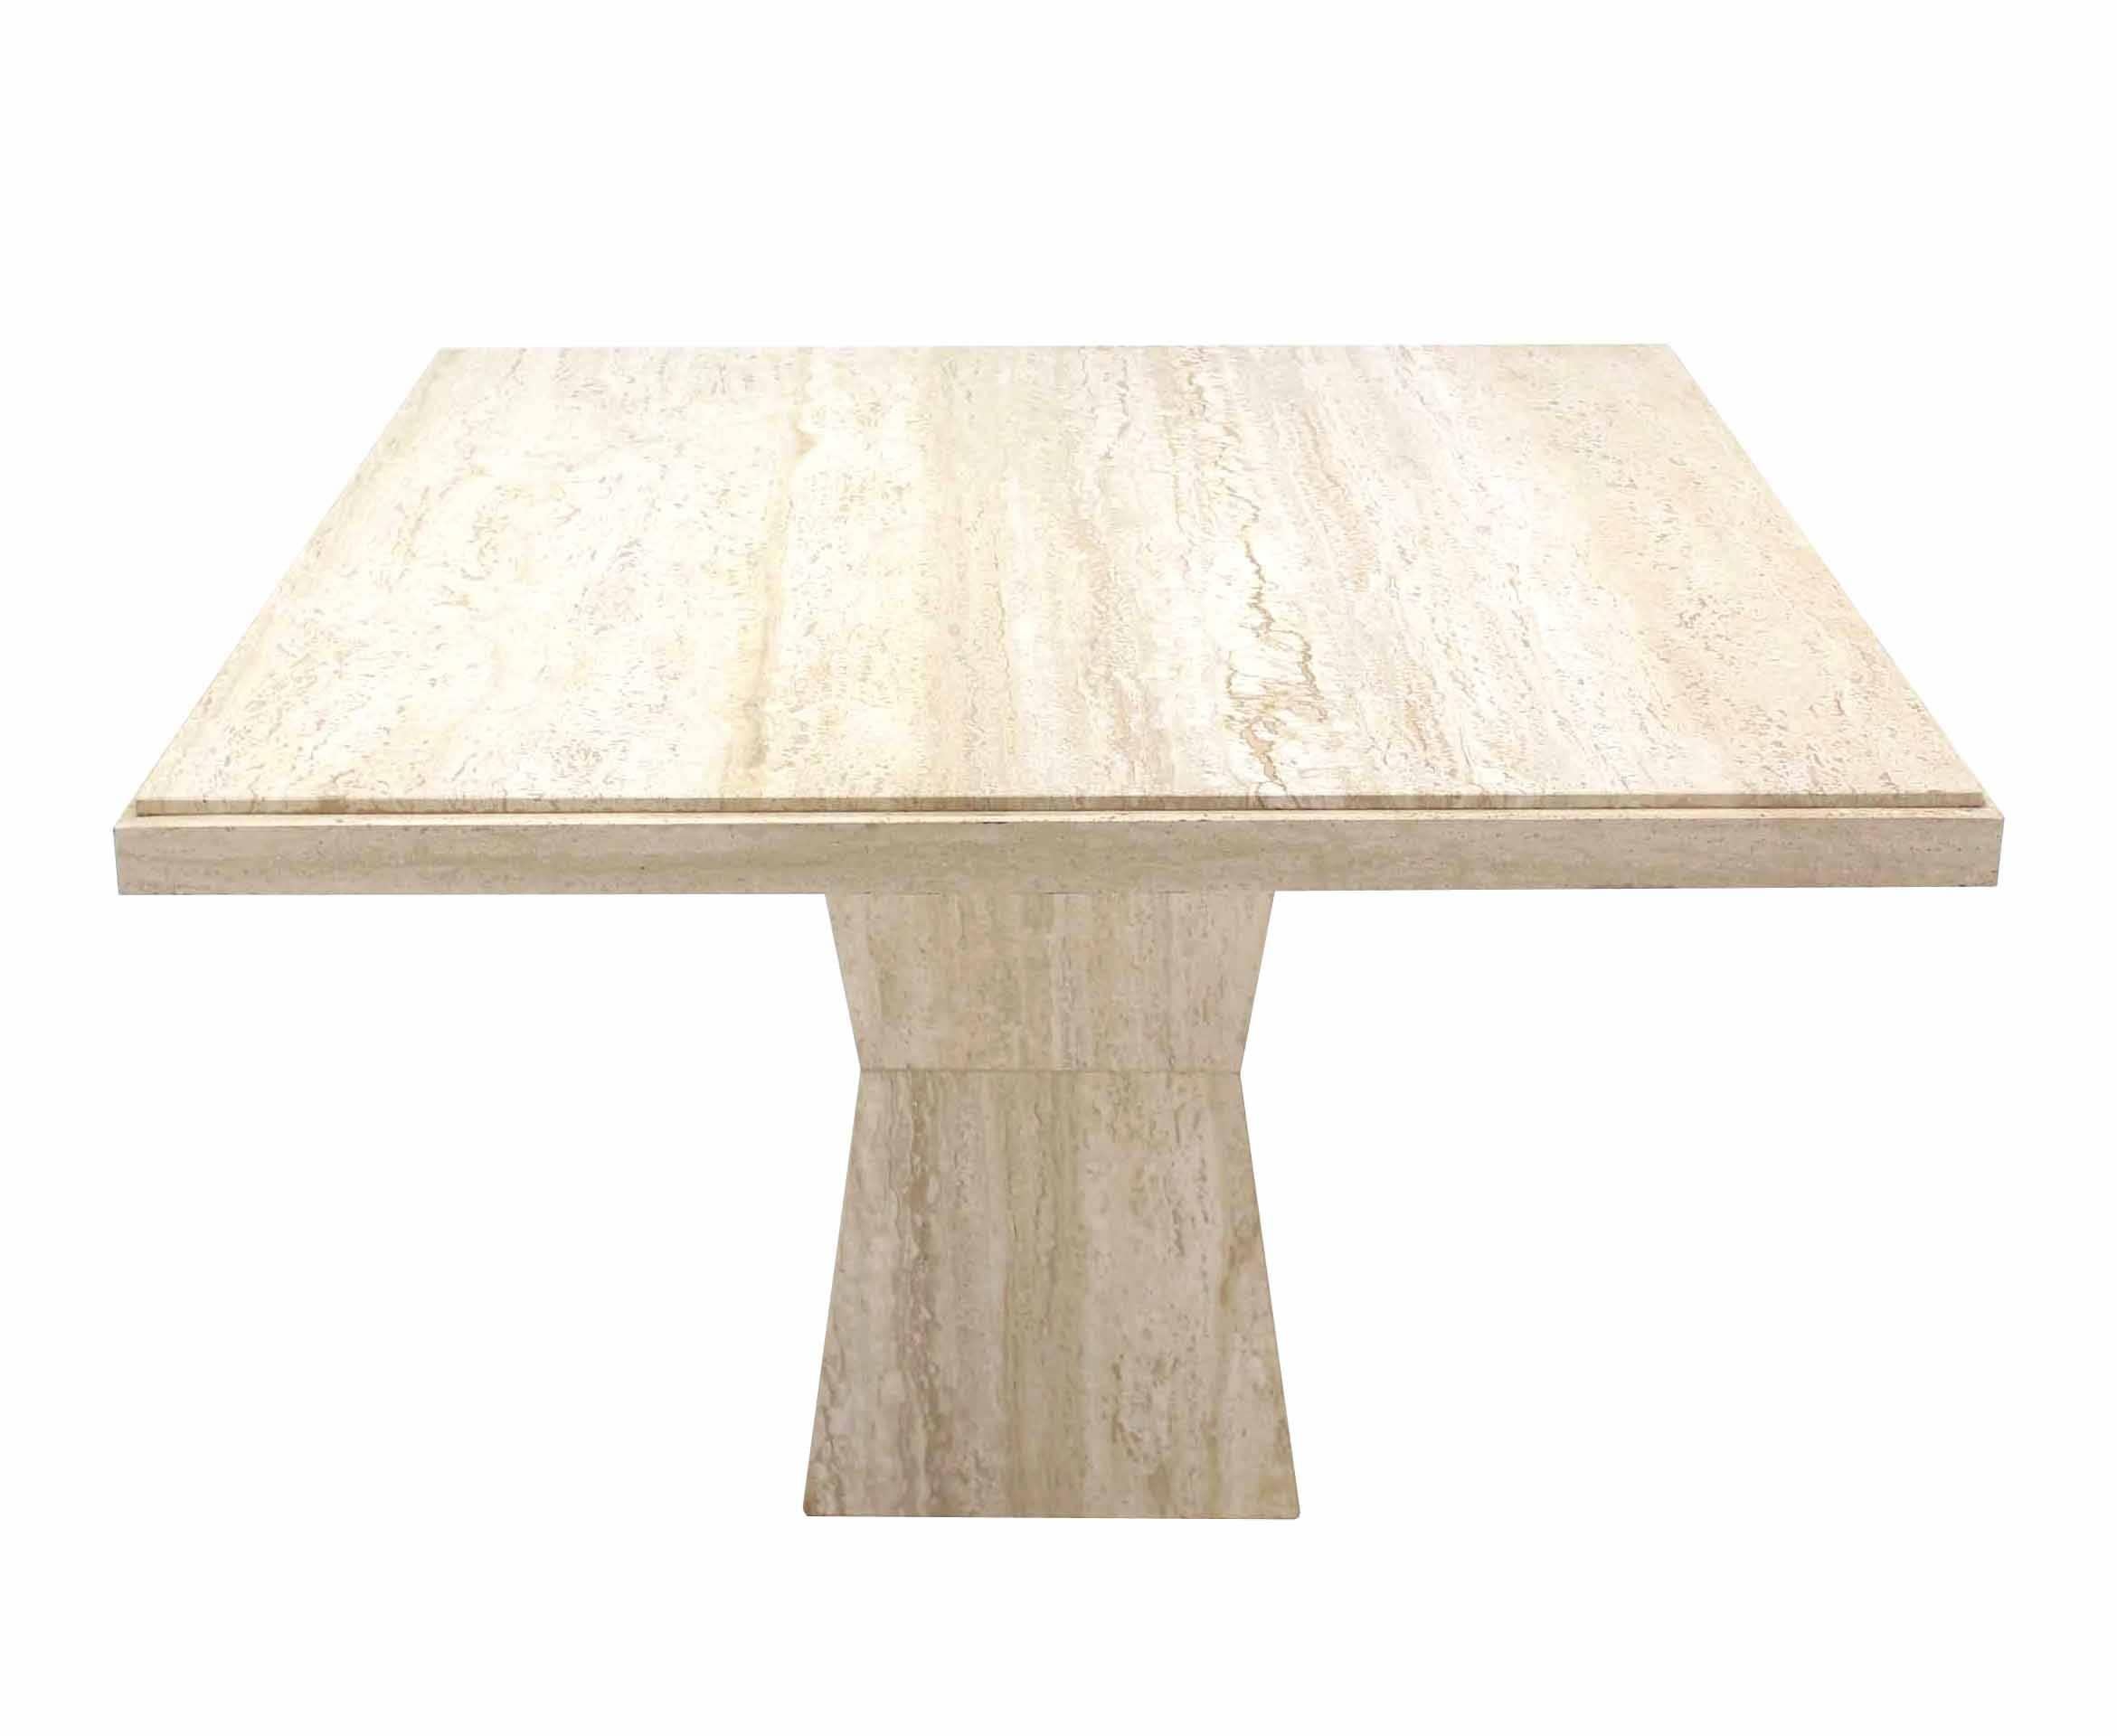 Very nice square travertine dining dinette or game table. The square top measures 44X44 inches.